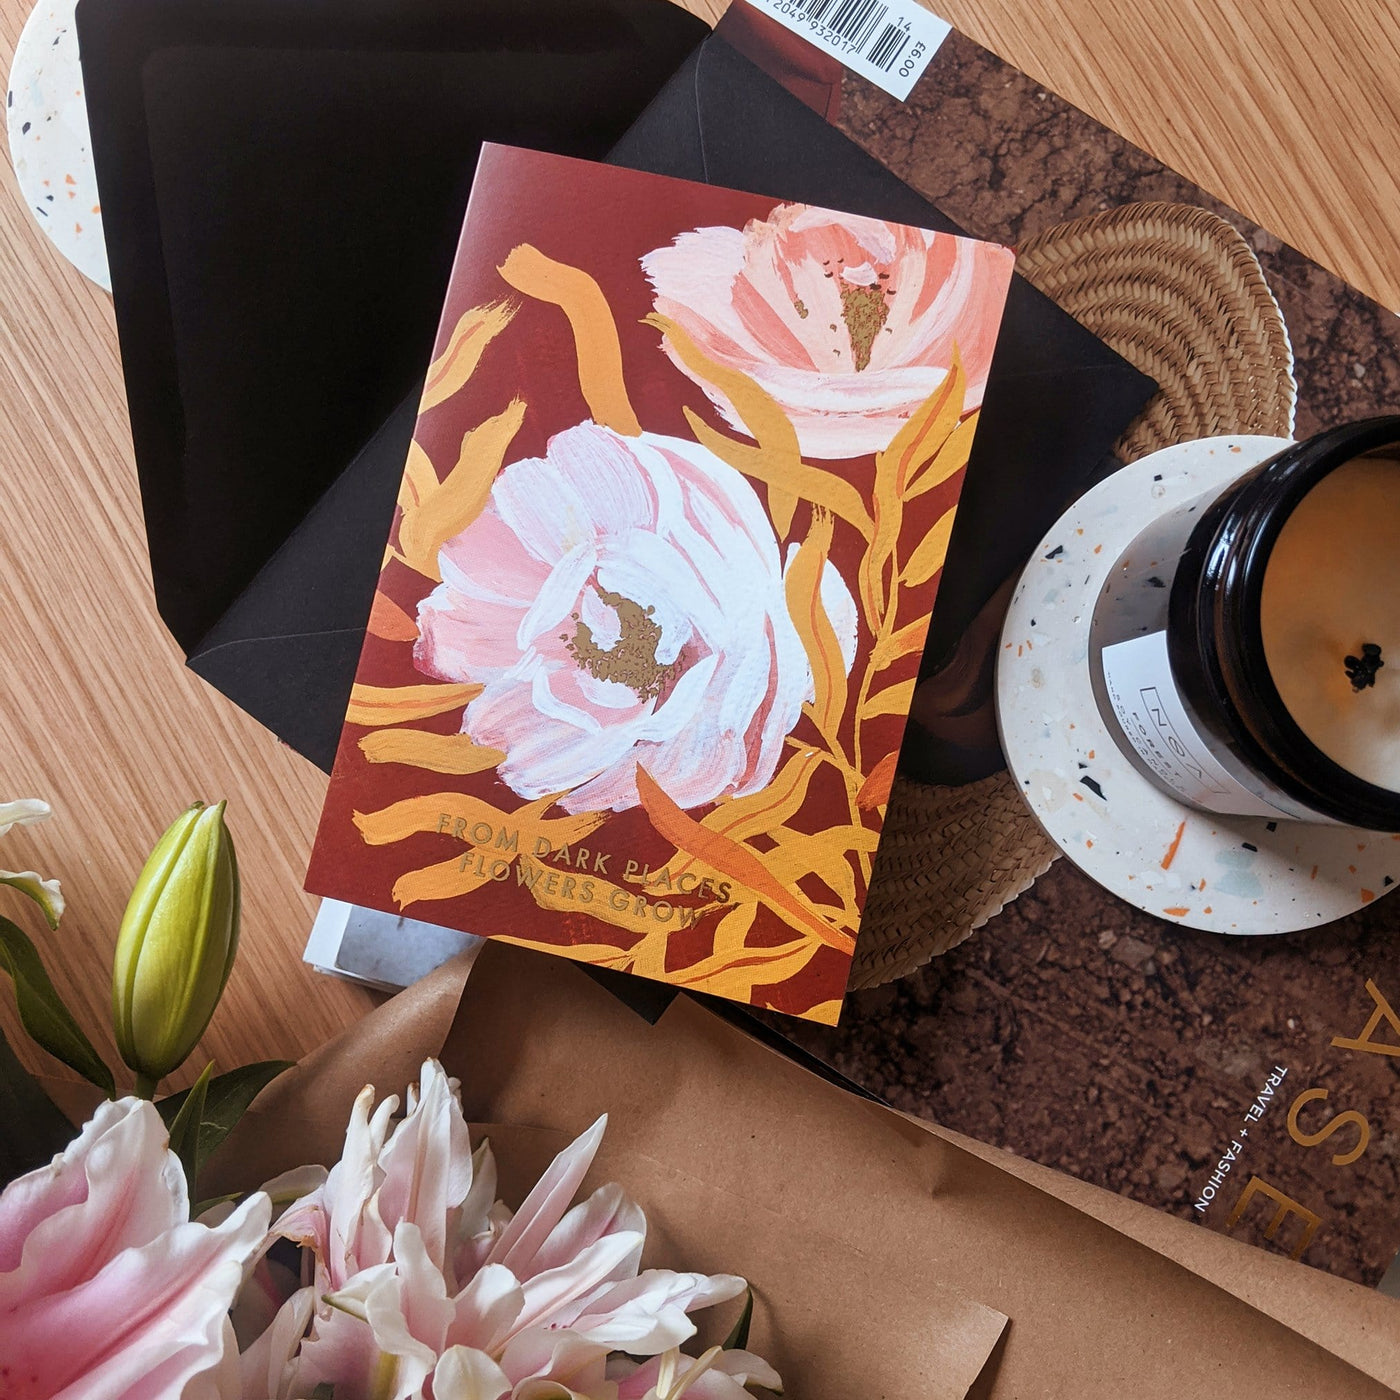 Botanical Greeting Card Pink English Tea Roses On Warm Brown Background With The Words From Dark Places Flowers Grow In Gold With Black Envelope Next To A Candle - Annie Dornan Smith